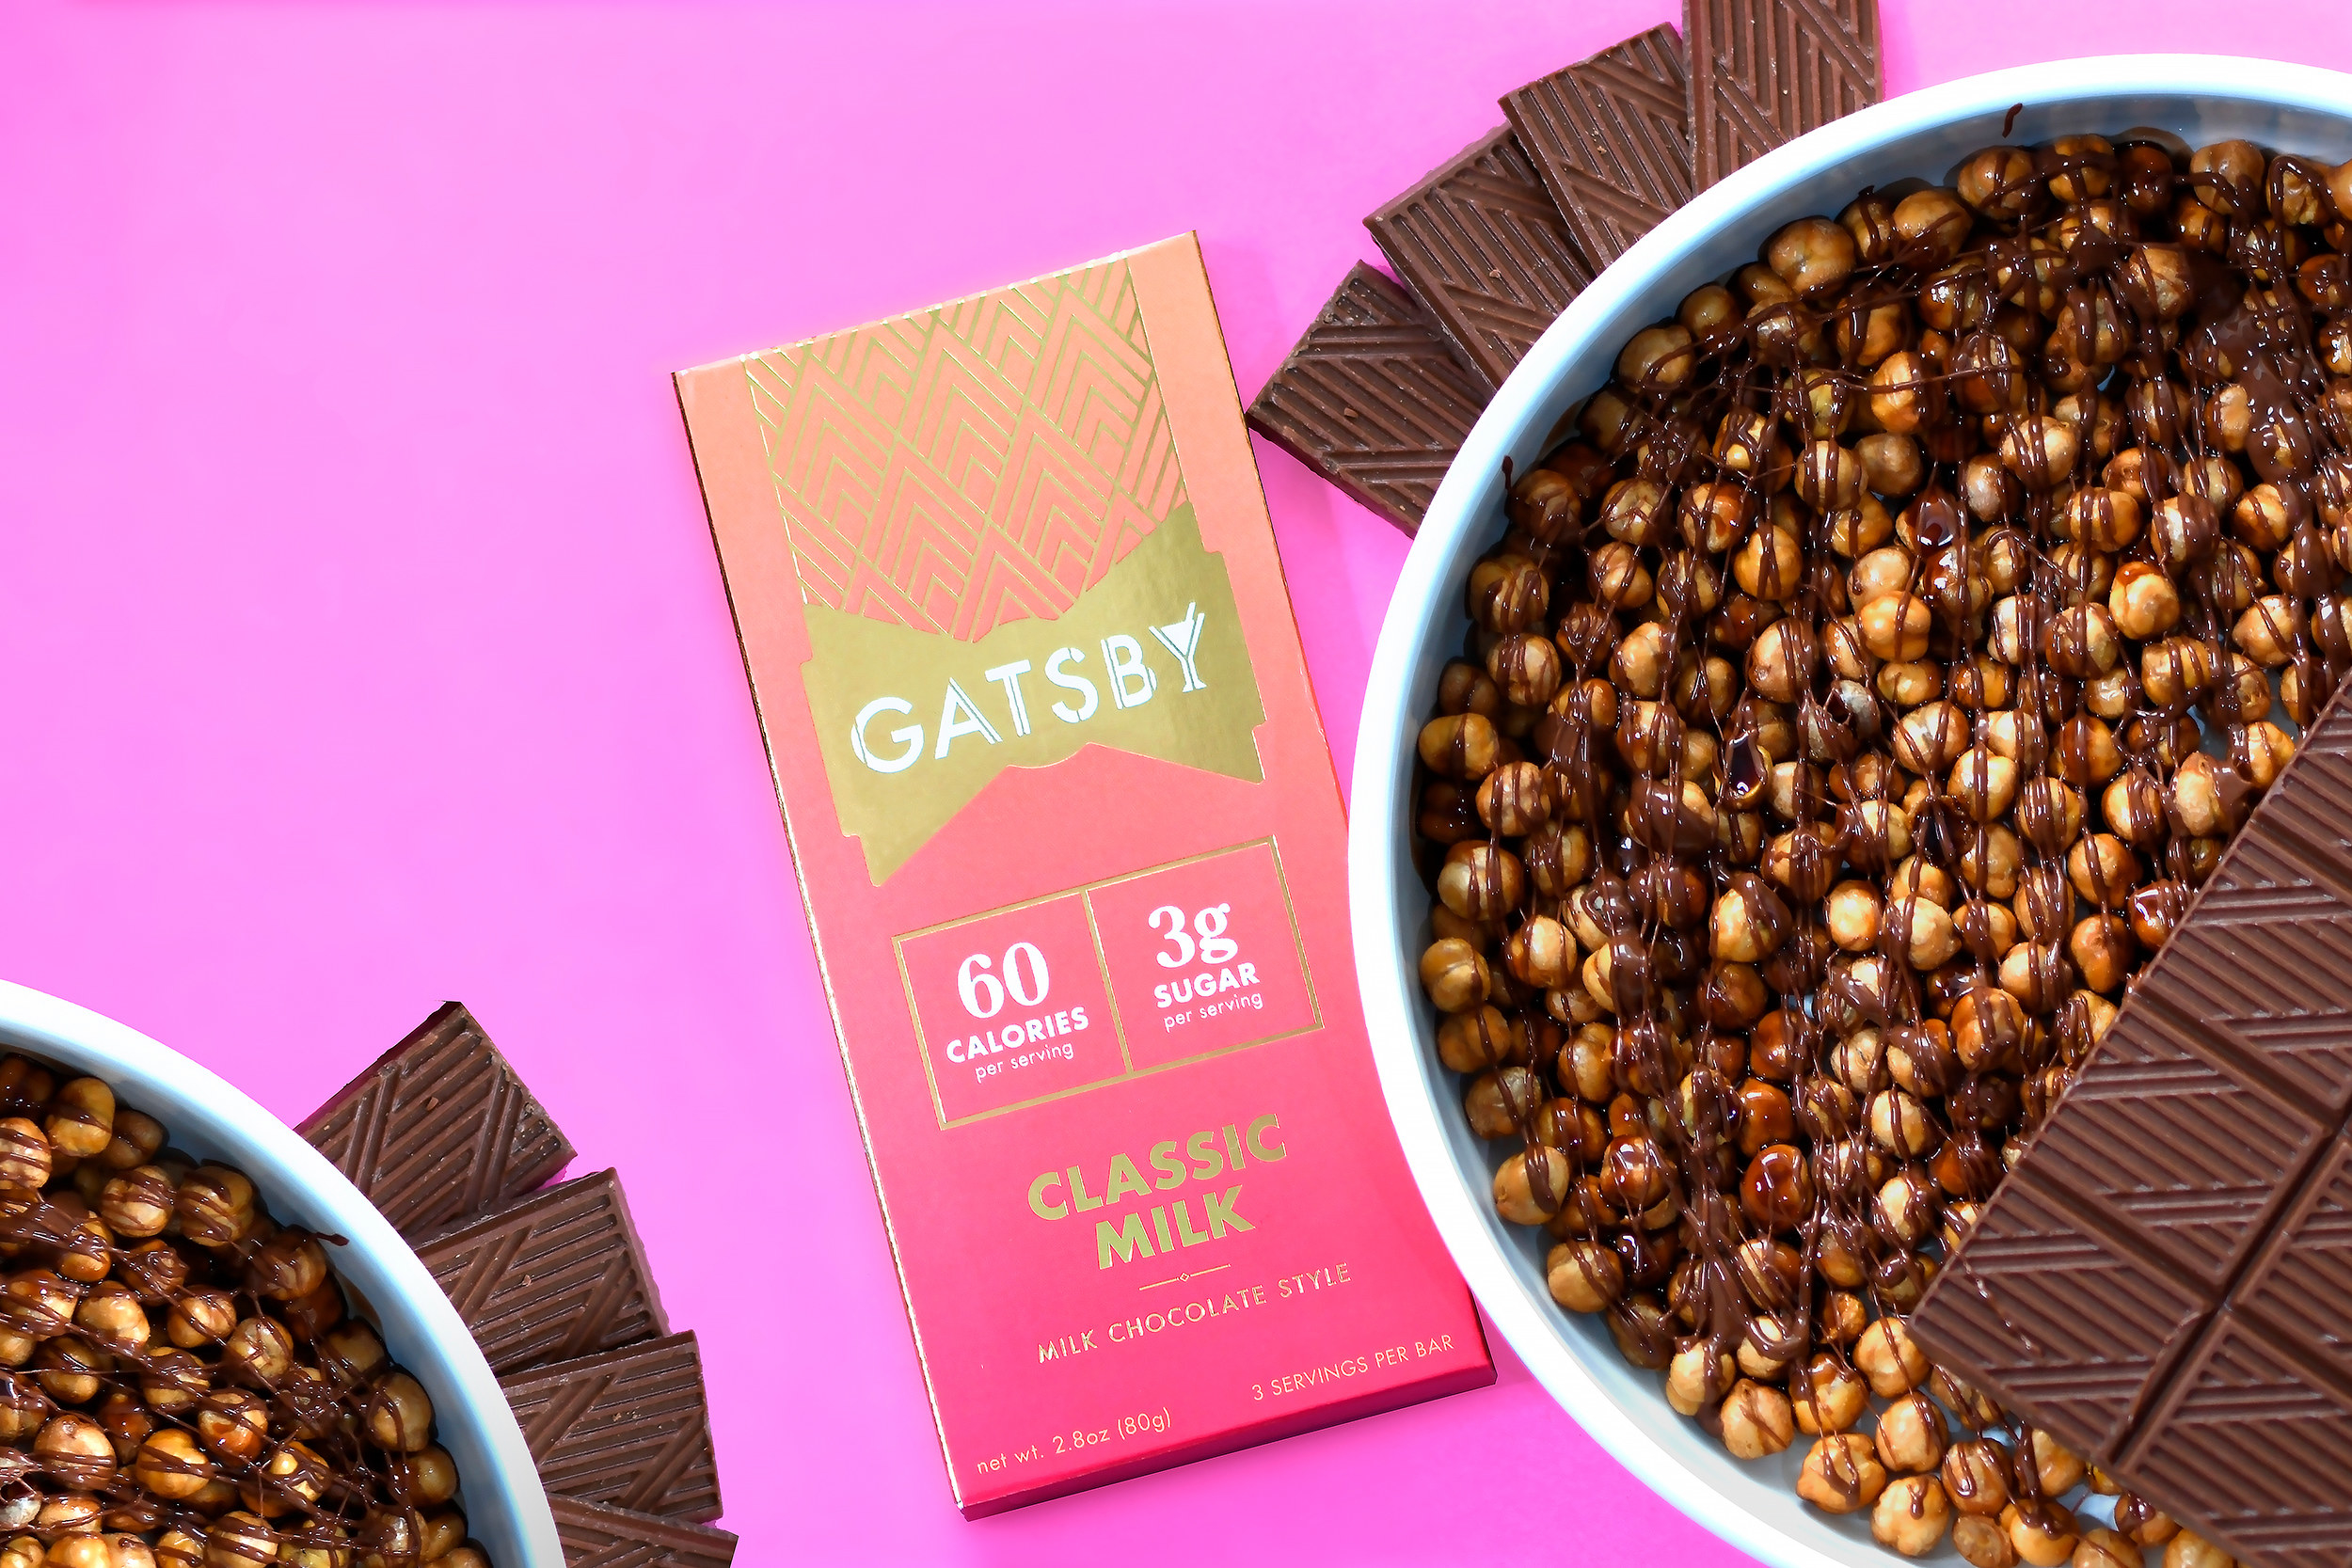 The Gatsby Classic Milk Bar next to a pot of chickpeas drizzled with chocolate